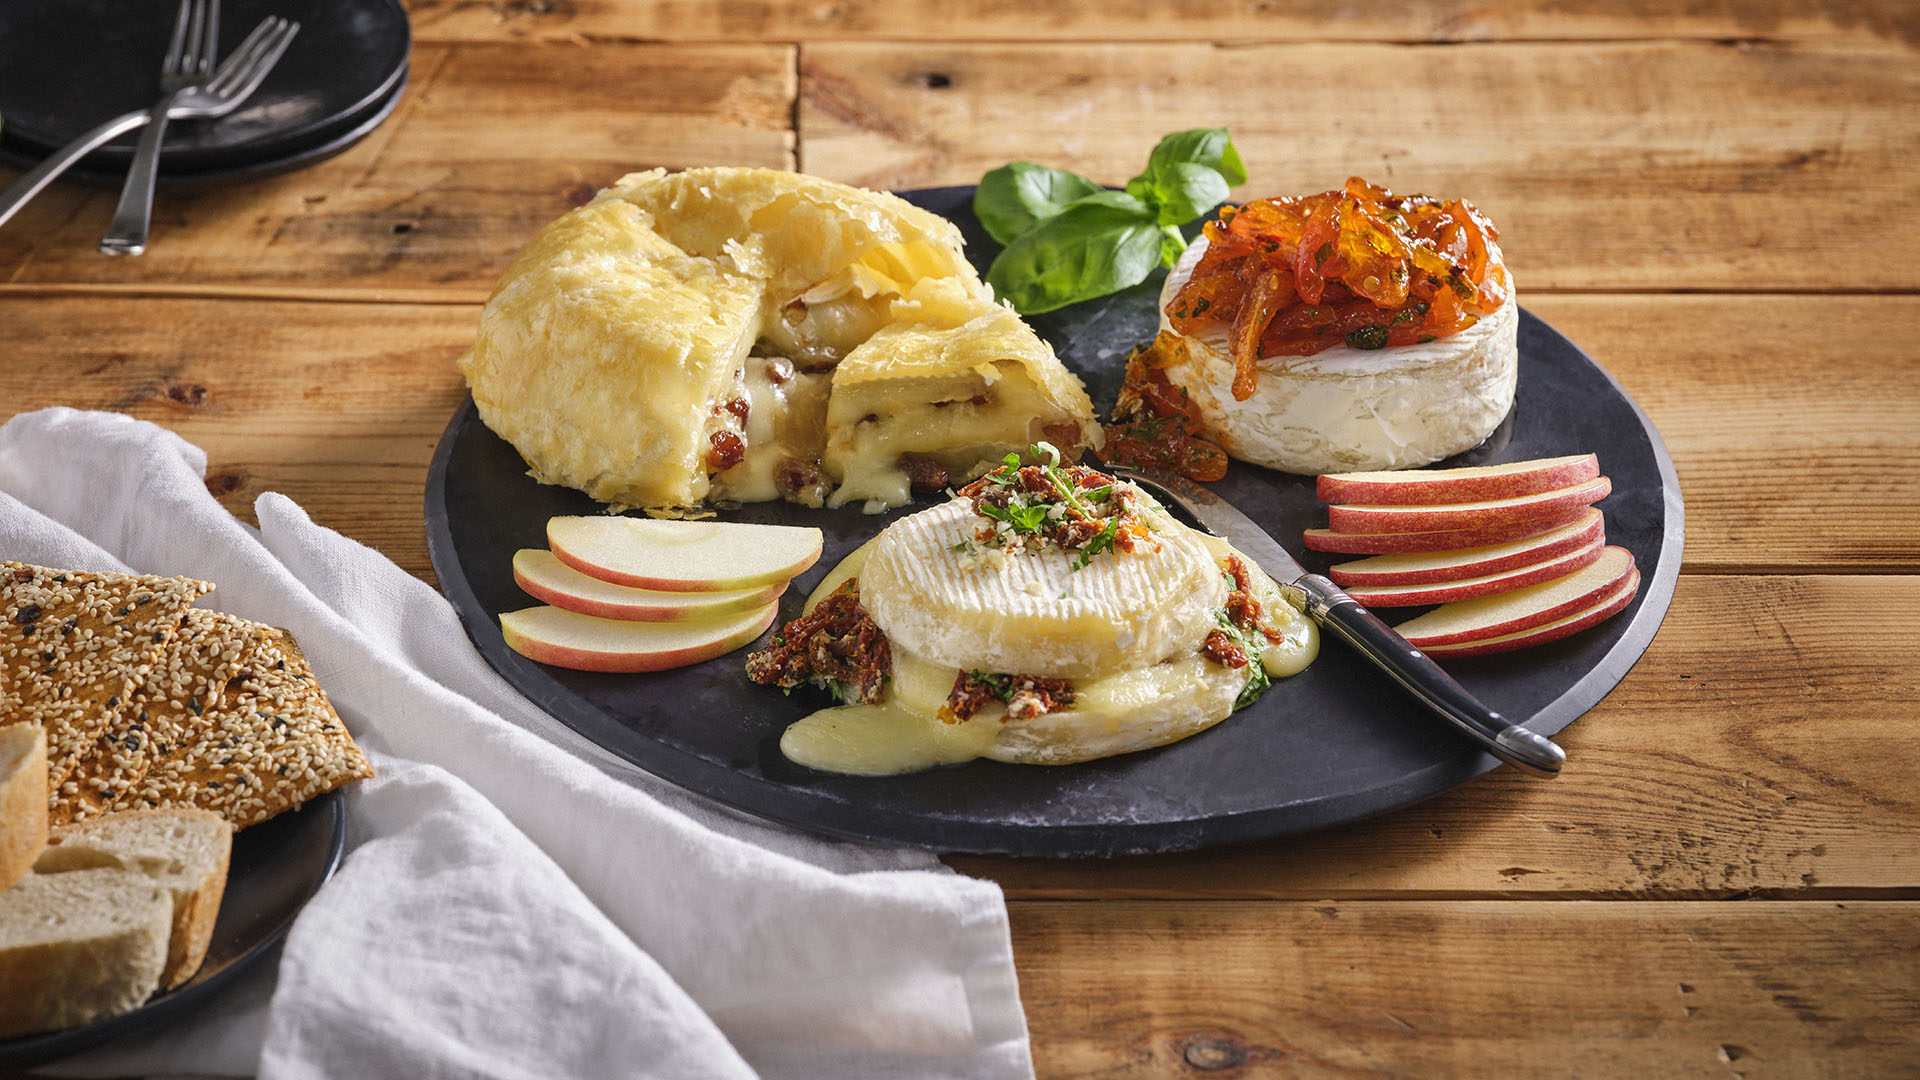 Round, black serving board with three baked bries, one with wrapped in pastry dough, one with dried apricot on top, and the other stuffed with sun-dried tomato, asiago and parsley.